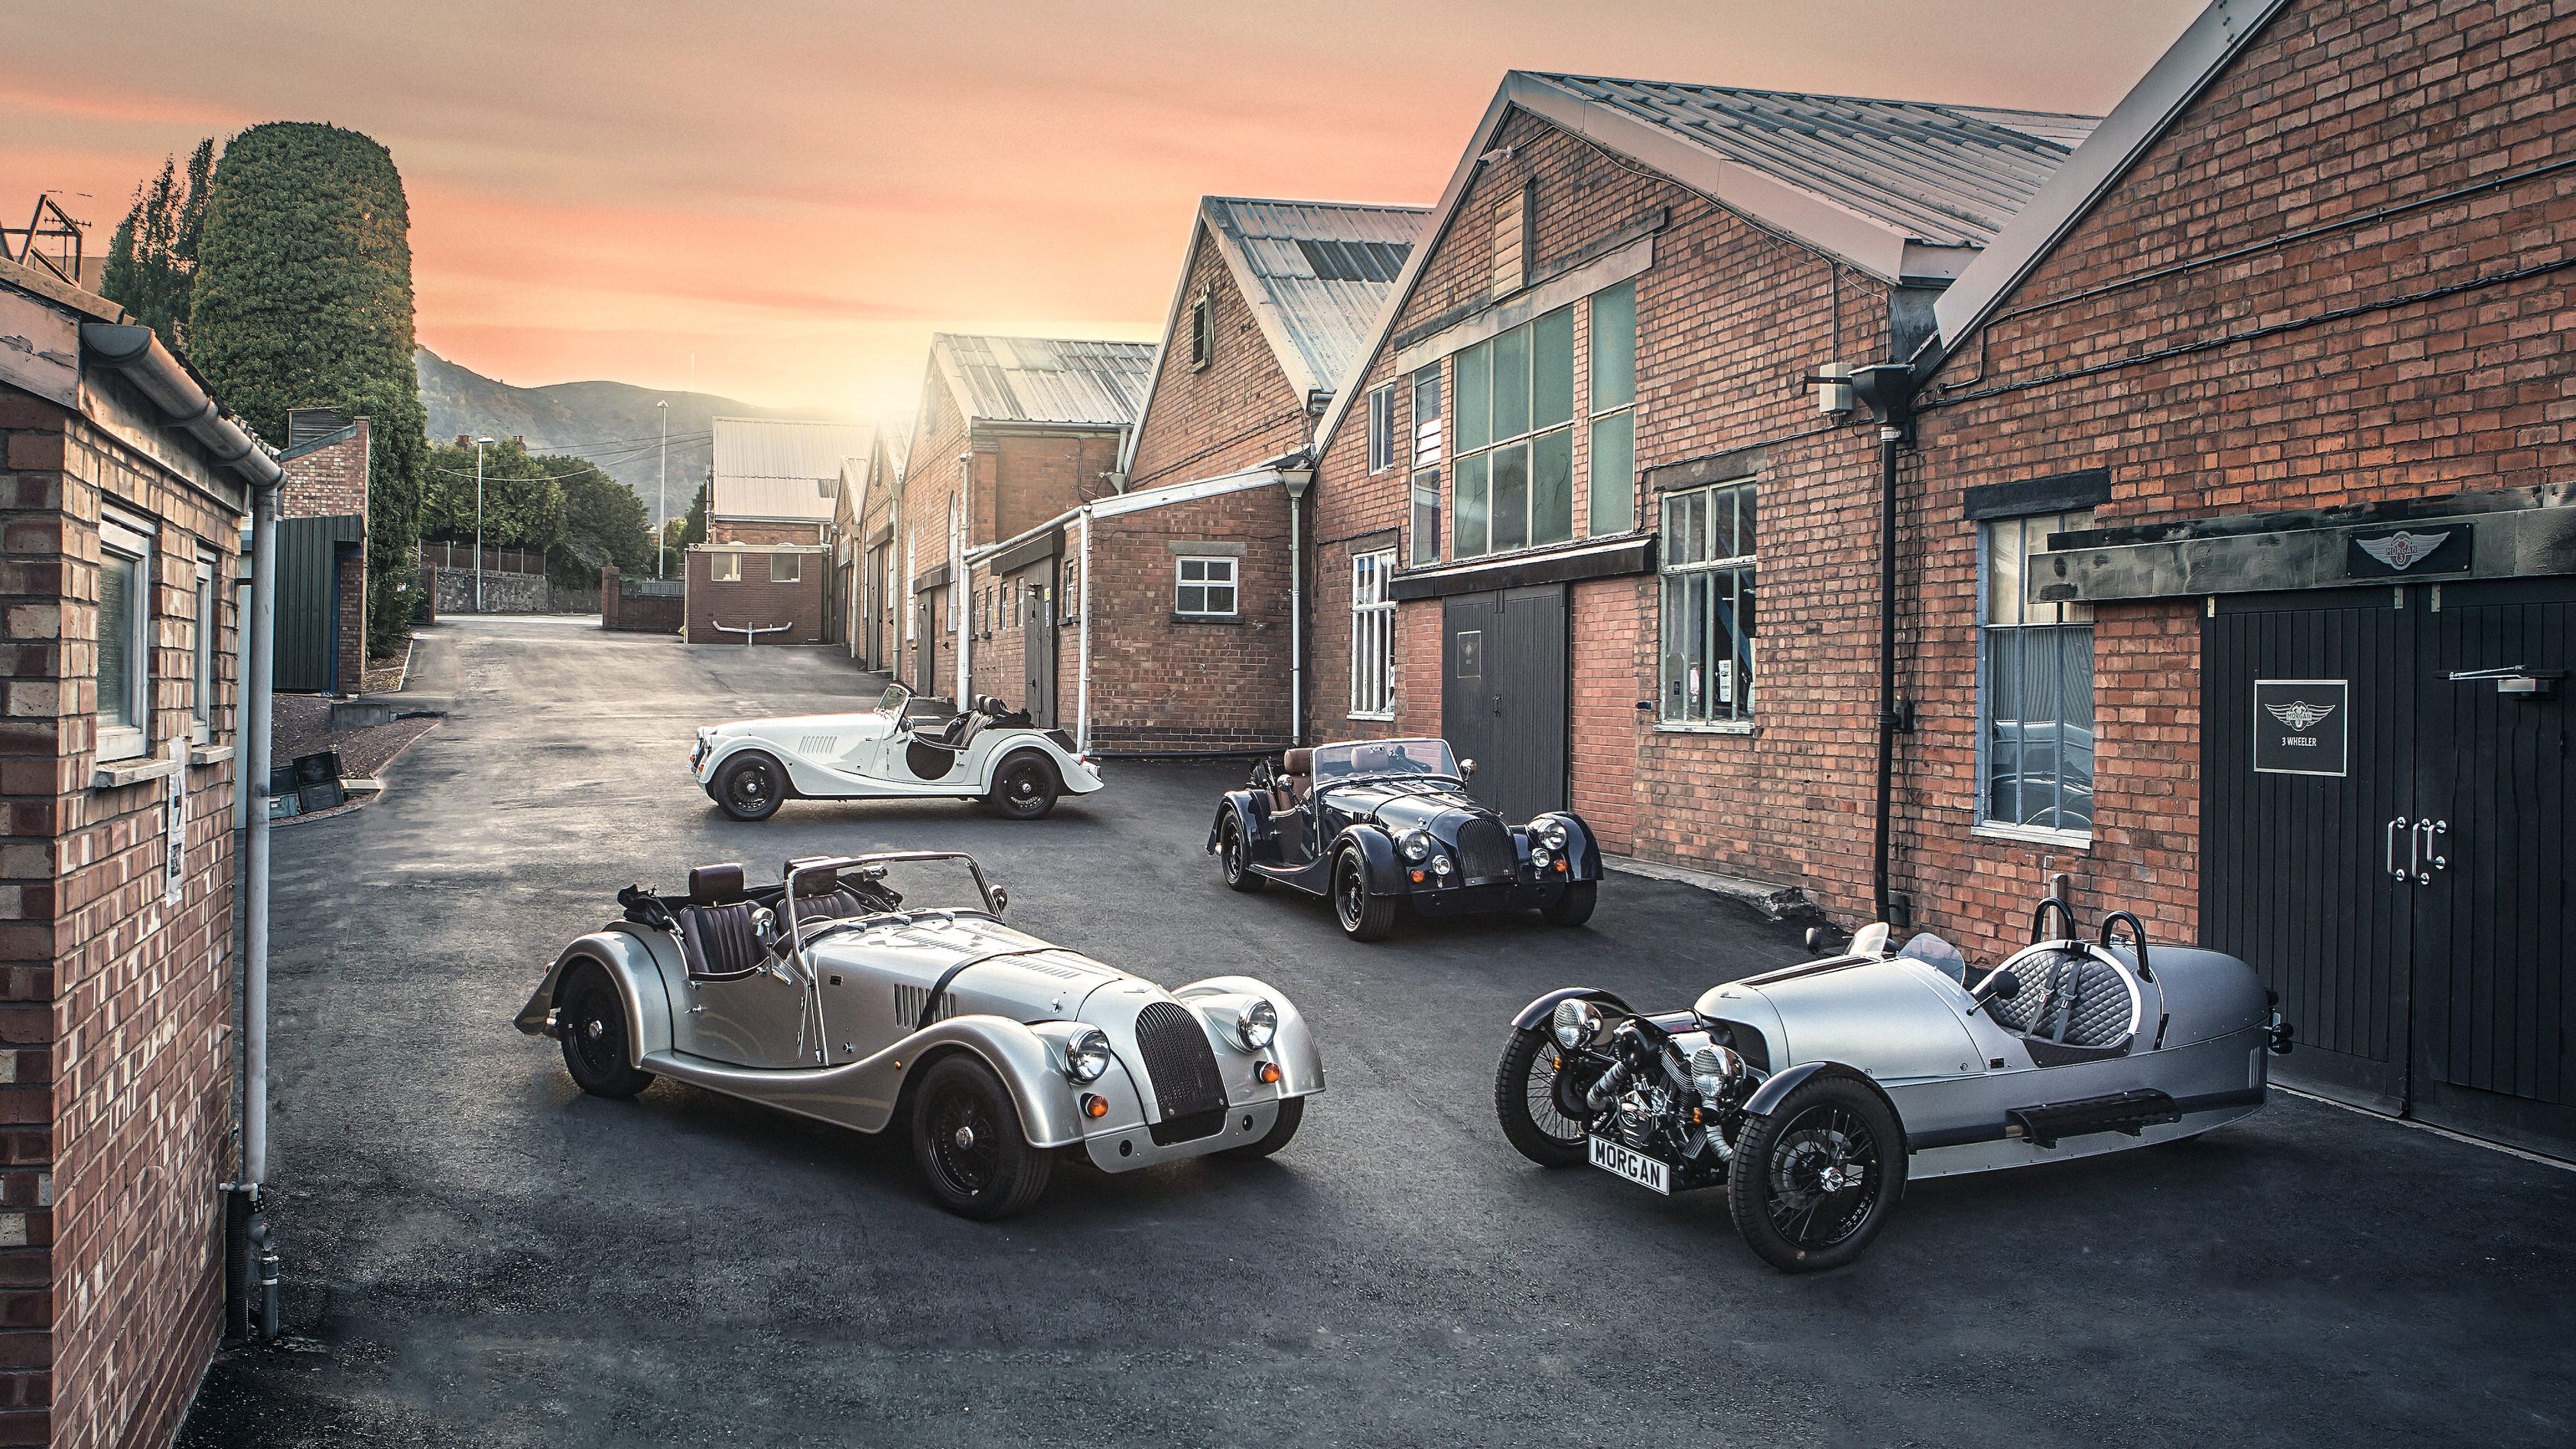 Morgan Celebrates The 110th Anniversary: Learn About 6 Most Important Cars It Has Produced Picture, Photo, Wallpaper